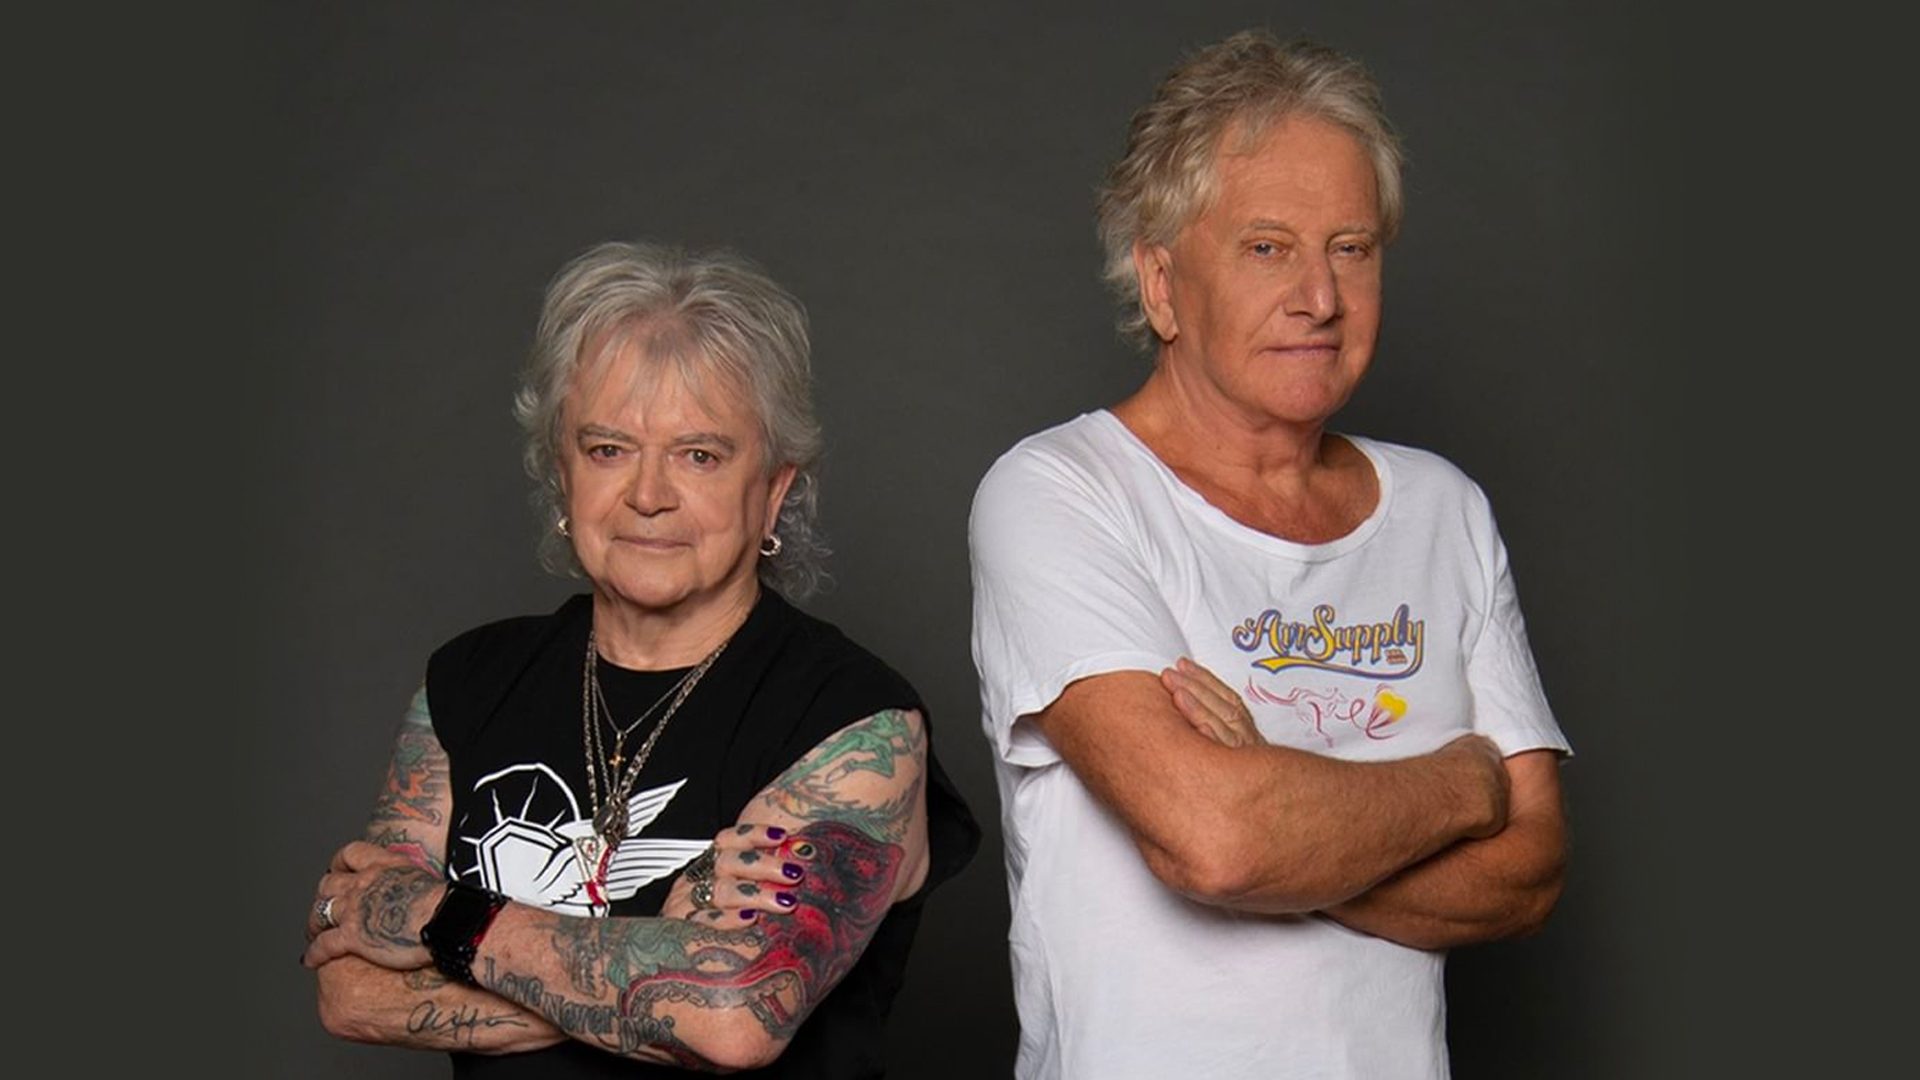 Air Supply to hold Laguna concert in December